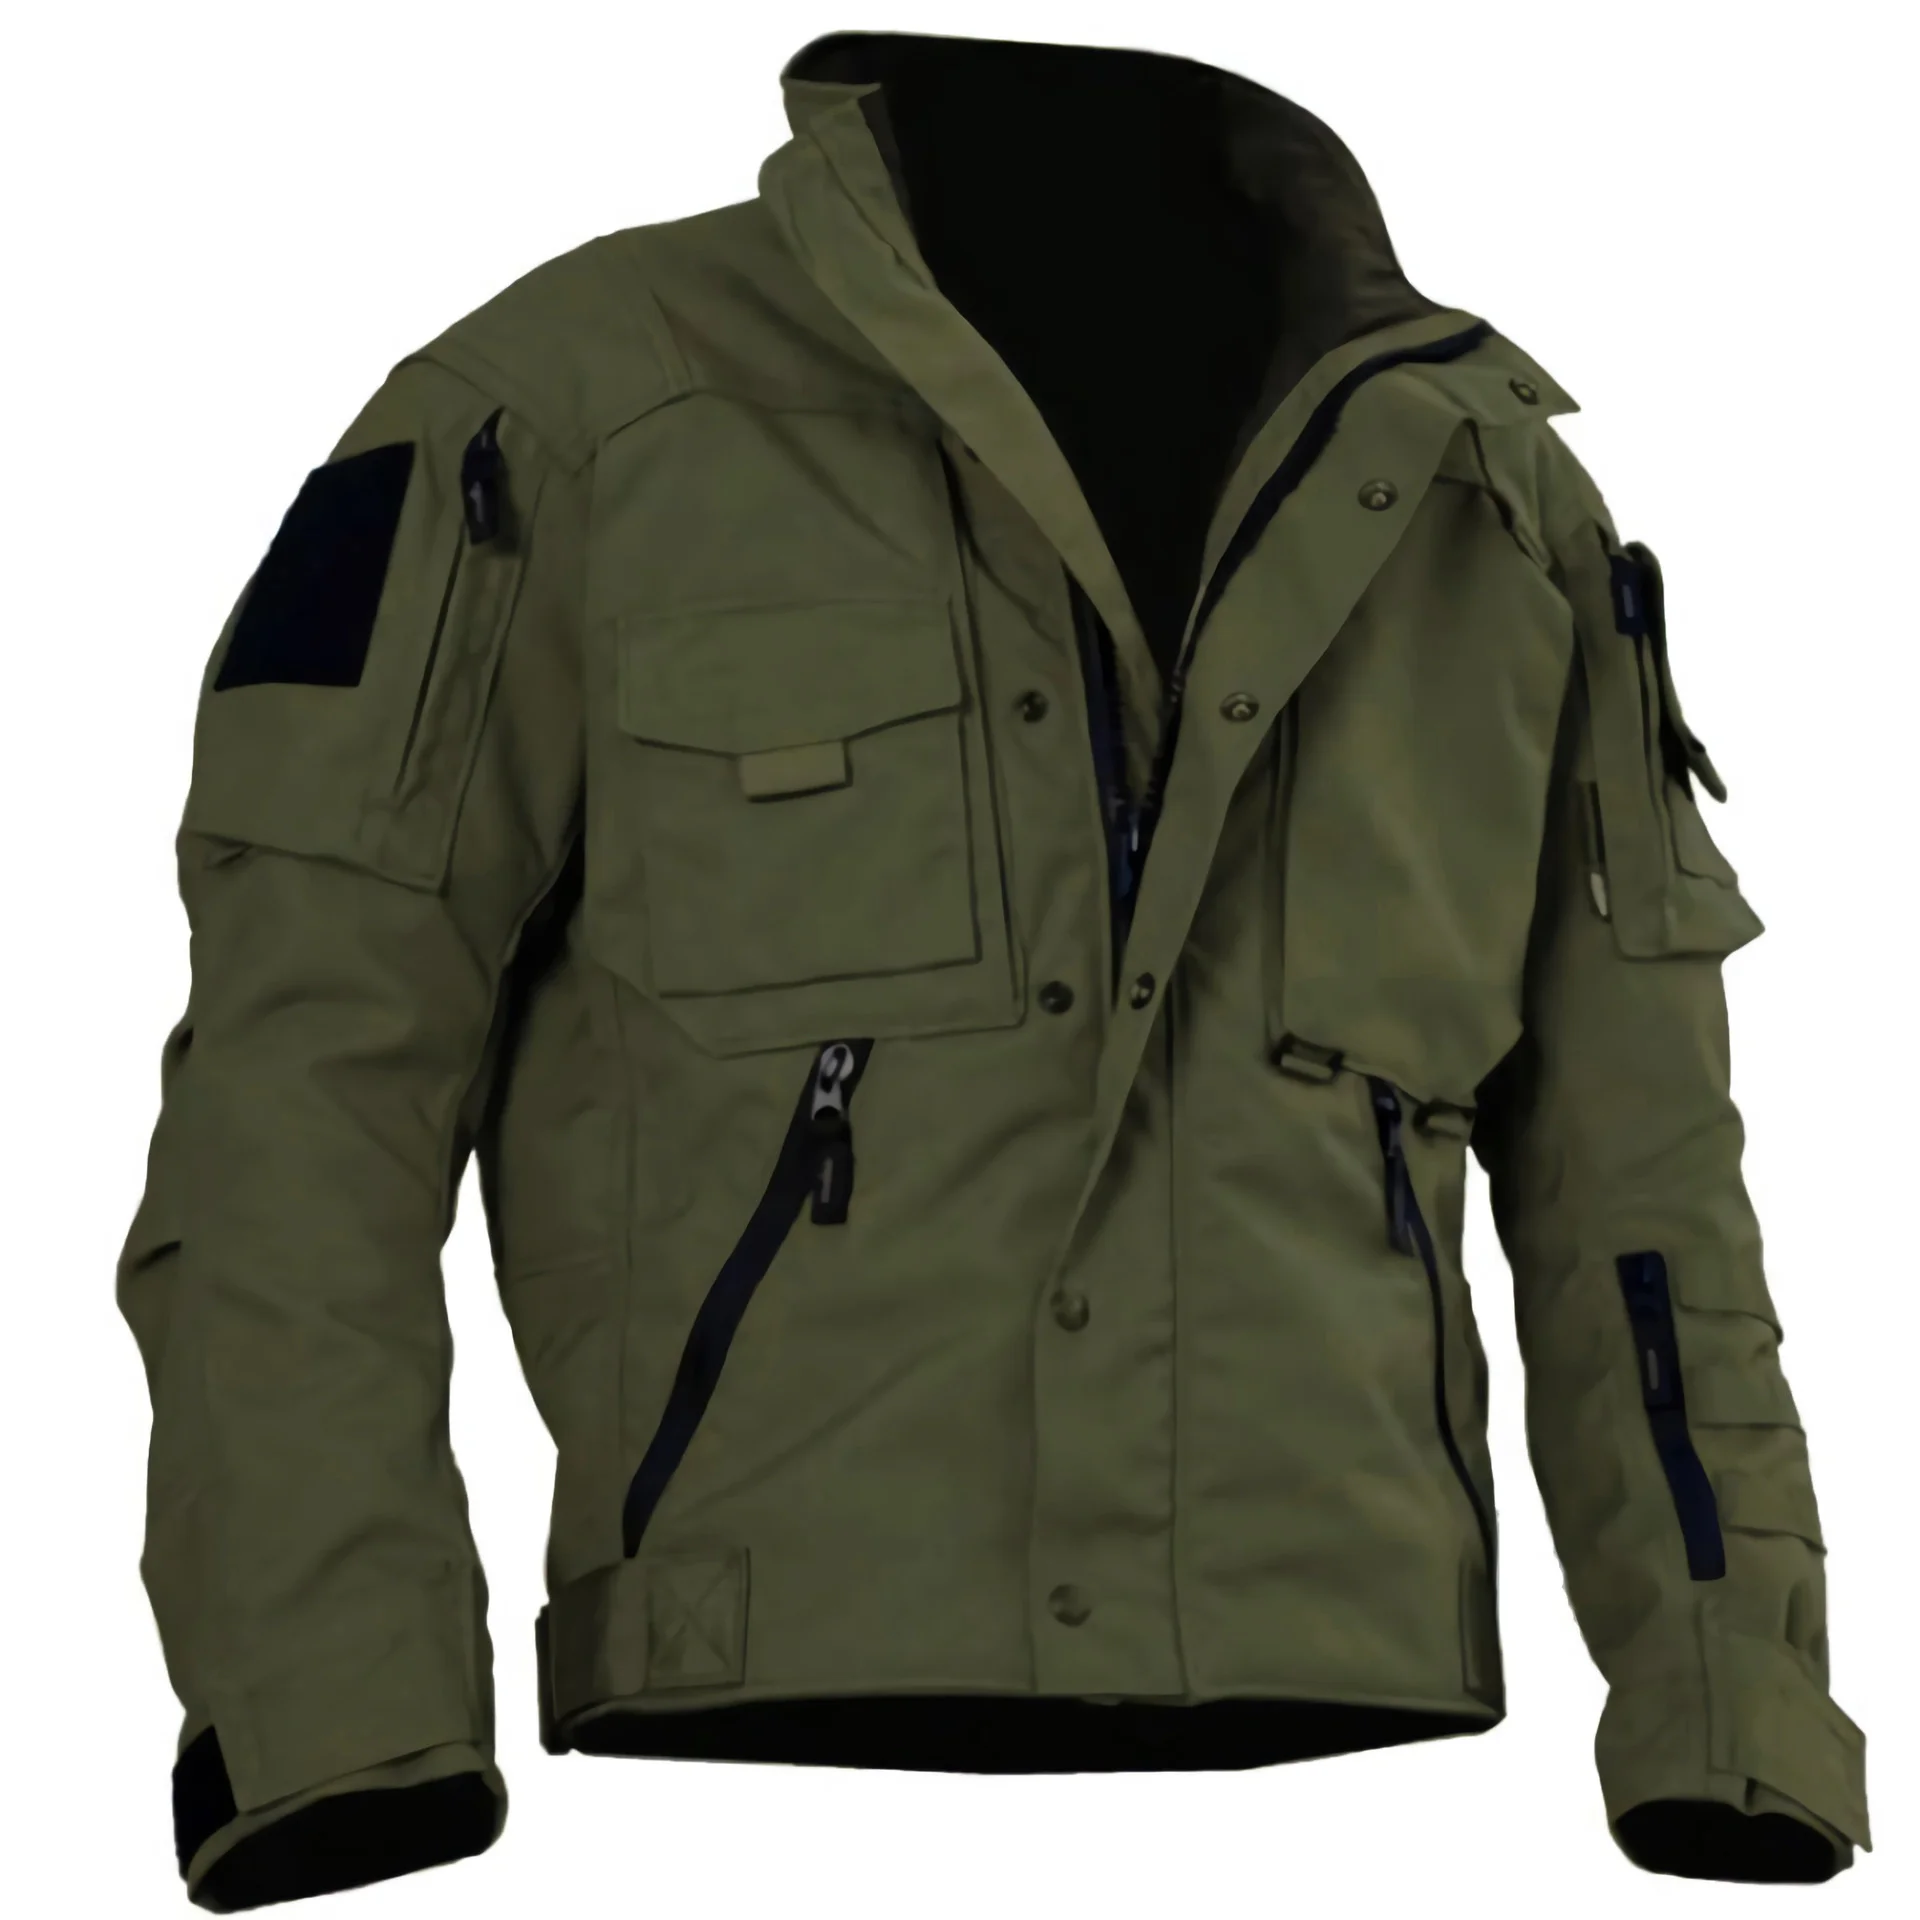 Plus Size Military Tactical Jacket Men Waterproof Multifunctional Pocket Casual Bomber Jacket Male Outwear Spring Autumn S-3XL